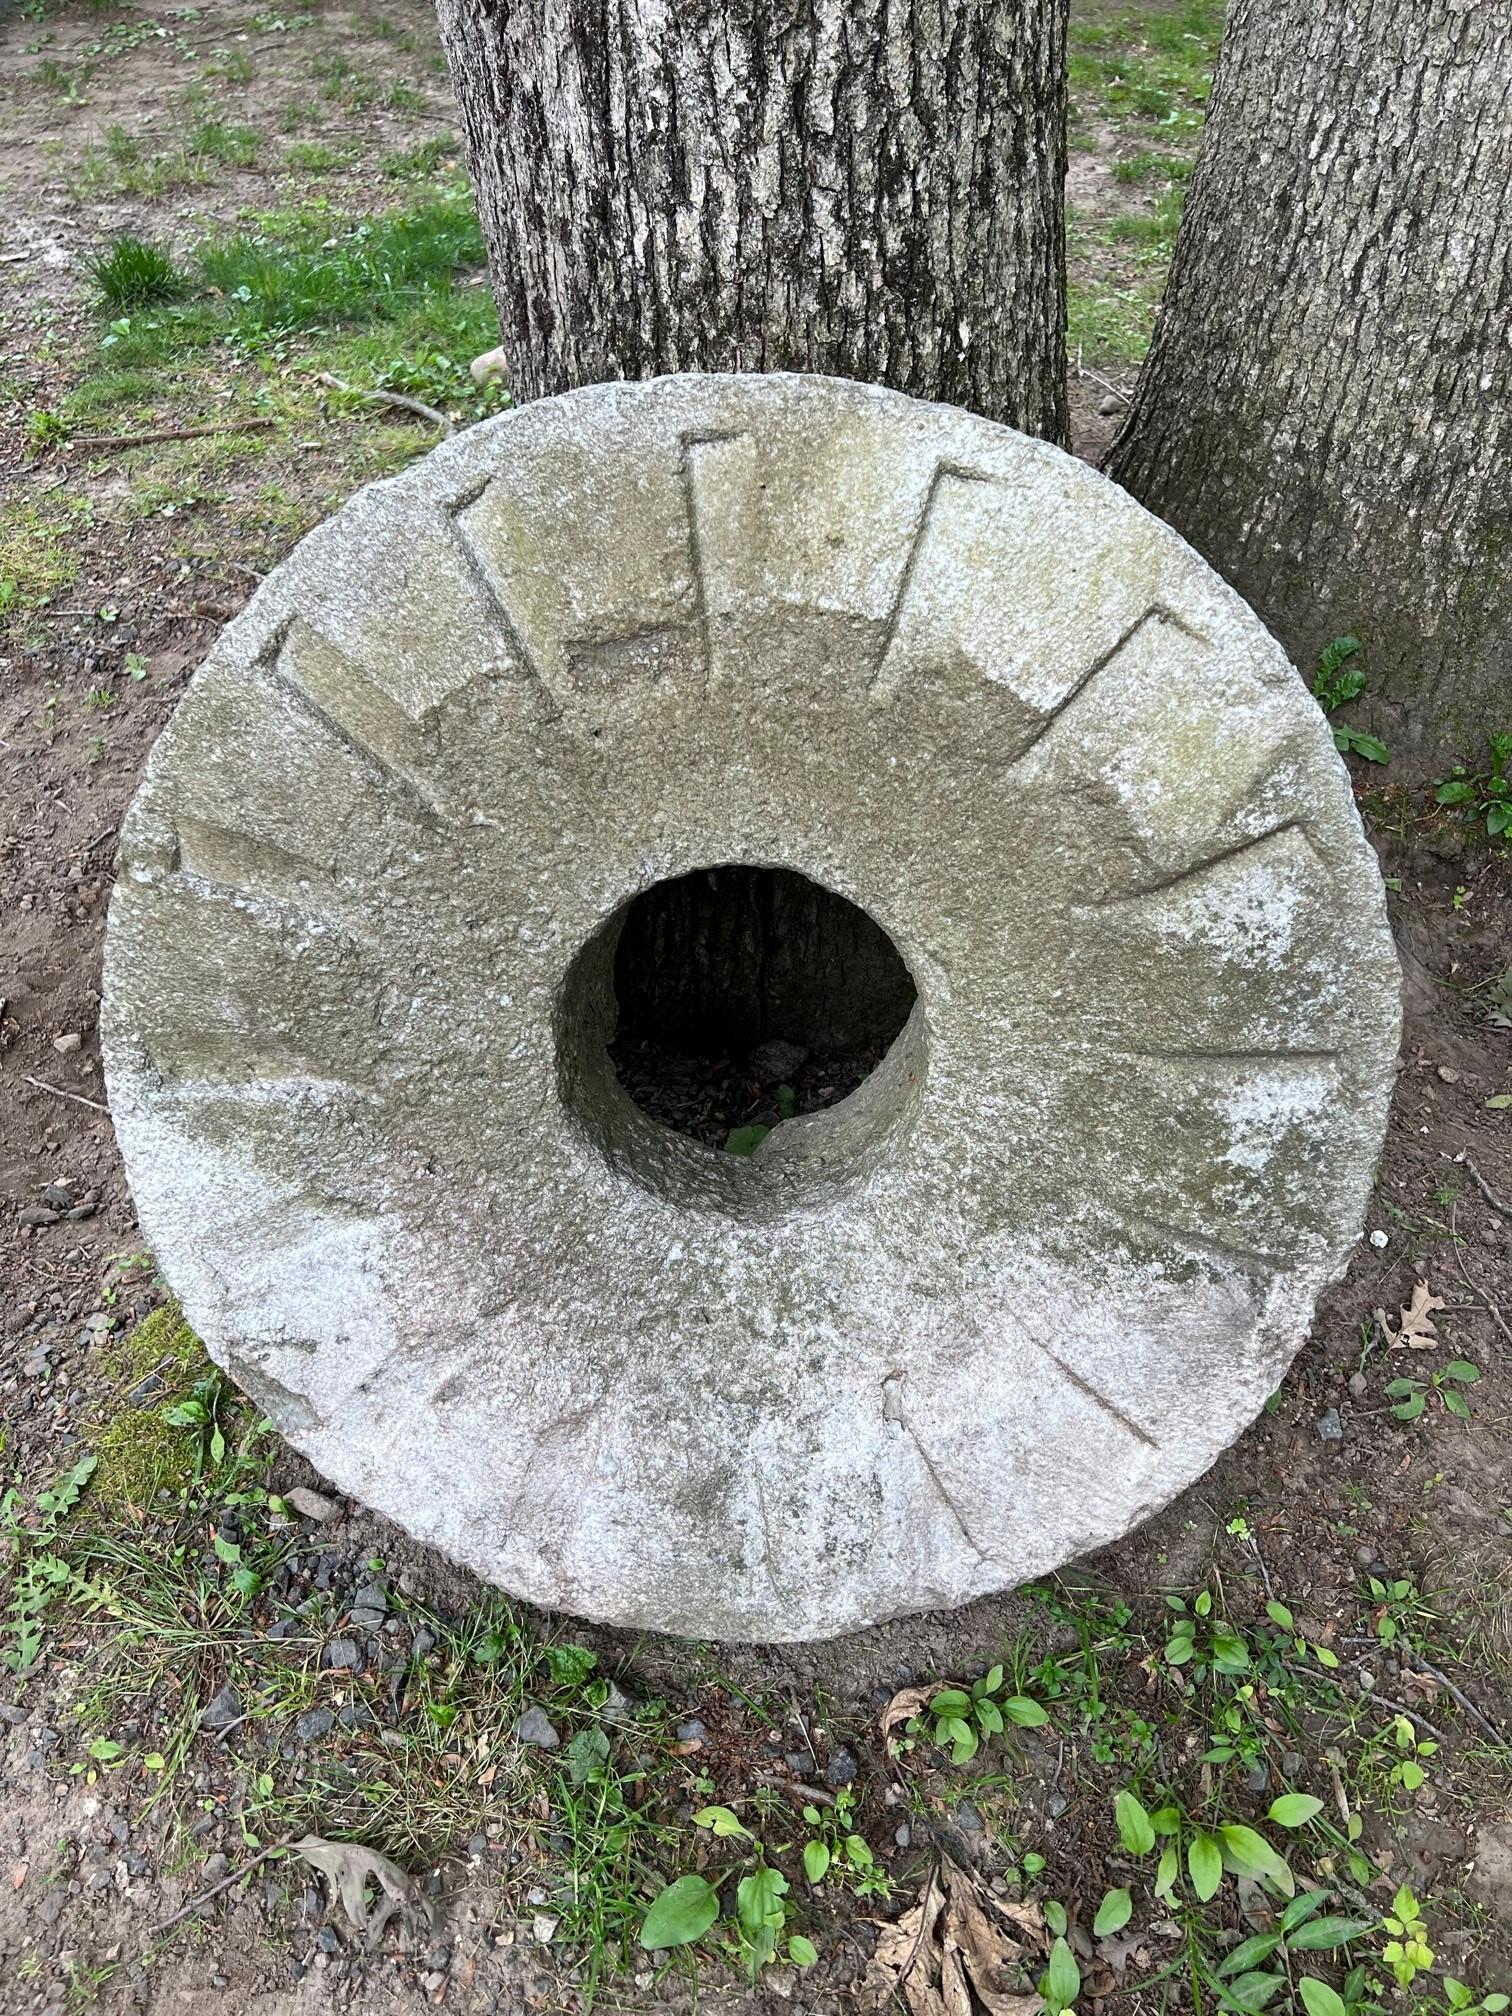 Antique vintage Millstones or Mill stone used in gristmills, for grinding wheat or other grains. They are sometimes referred to as grindstones or grinding stones. Millstones have always been a symbol of both the harvest and hospitality and make a